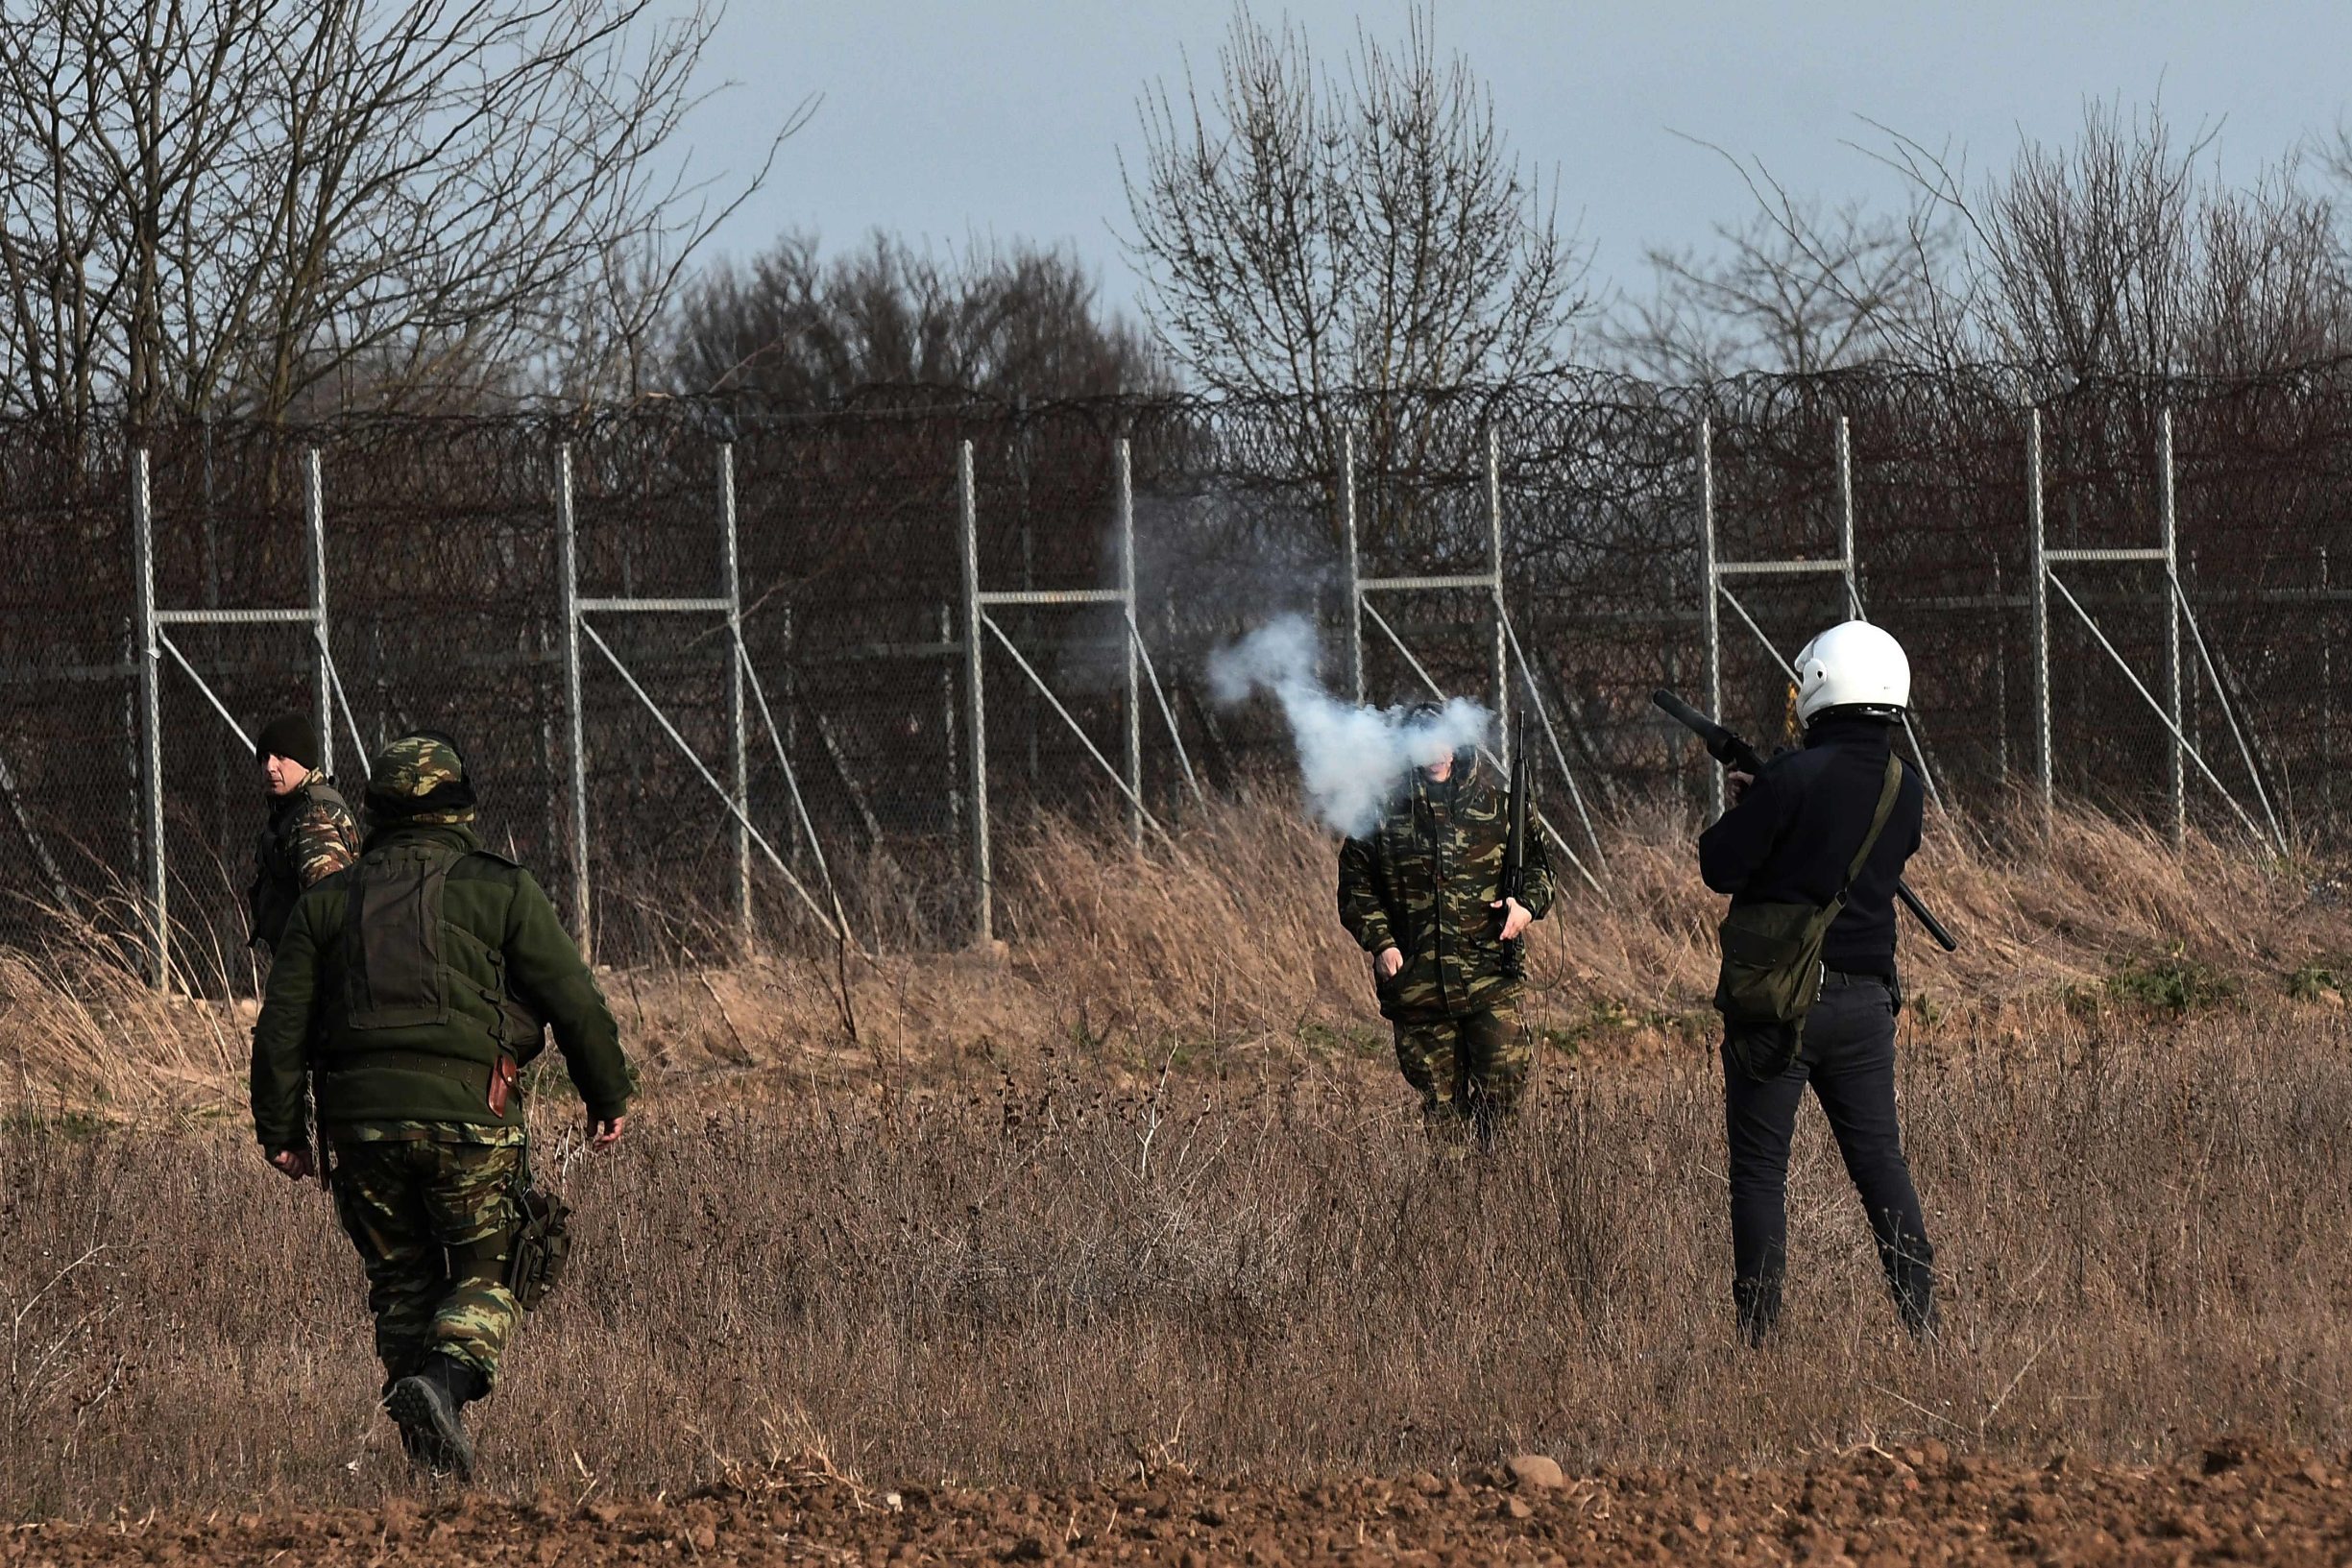 A Greek riot police officer lobs a tear gas canister during clashes with migrants along the Greece-Turkey border in the village of Kastanies on March 1, 2020. - Thousands more migrants reached the Turkish border with Greece on March 1, 2020, AFP journalists said, after the Turkish President threatened to let them cross into Europe. At least 2,000 people including women and children arrived on the morning from Istanbul and walked through a field towards the Pazarkule border gate, a correspondent said. The group included Afghans, Syrians and Iraqis. (Photo by Sakis MITROLIDIS / AFP)